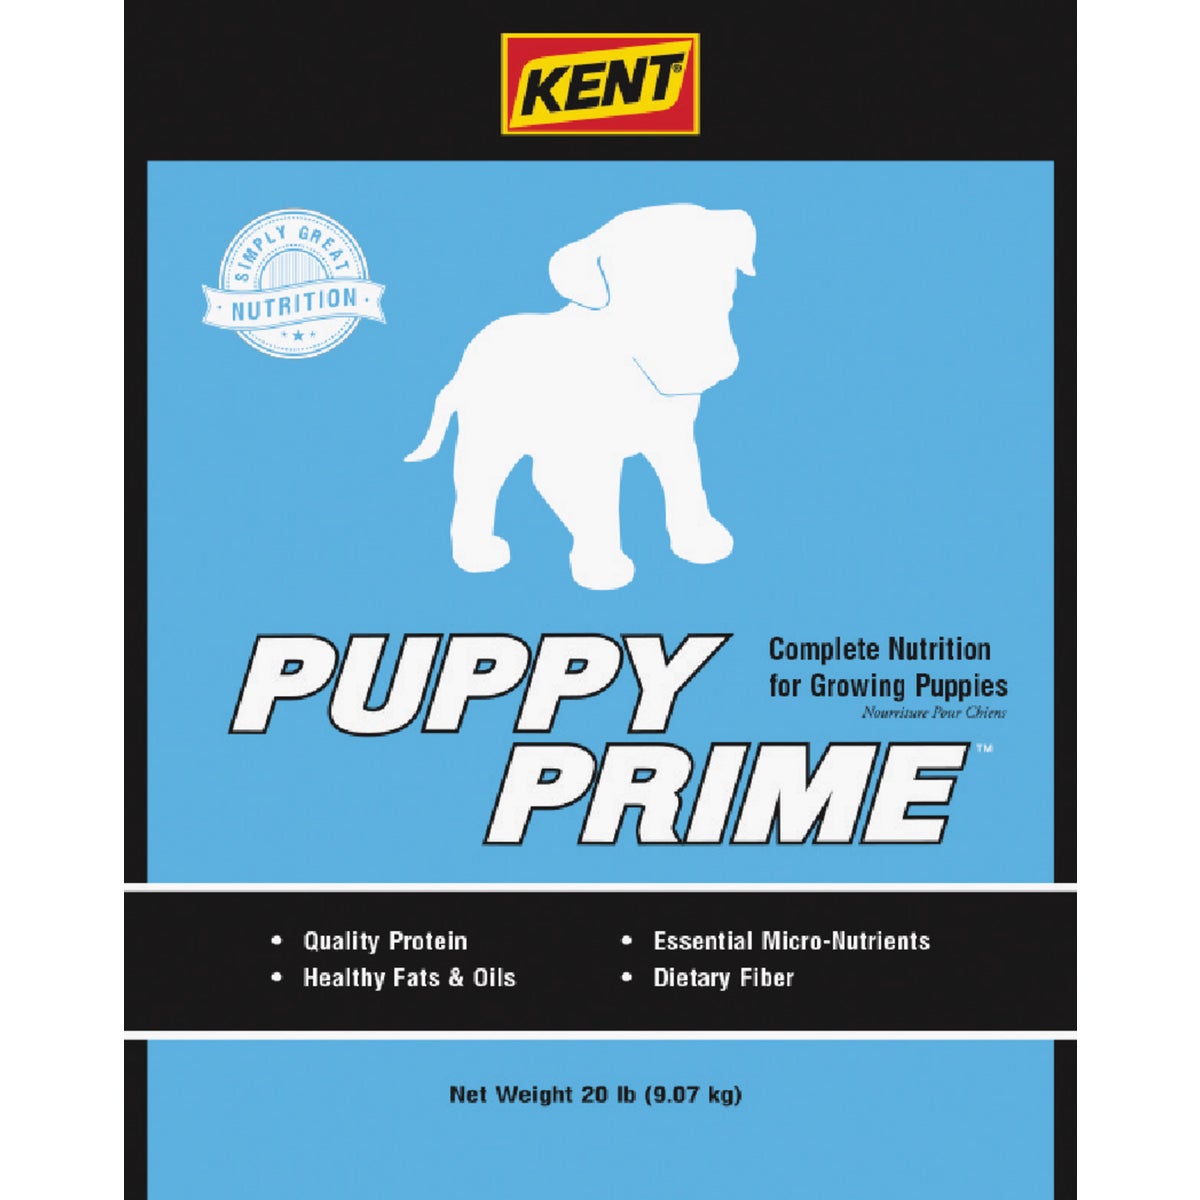 Item 801127, Puppy Prime offers a balanced diet for puppies up to 1 year of age.